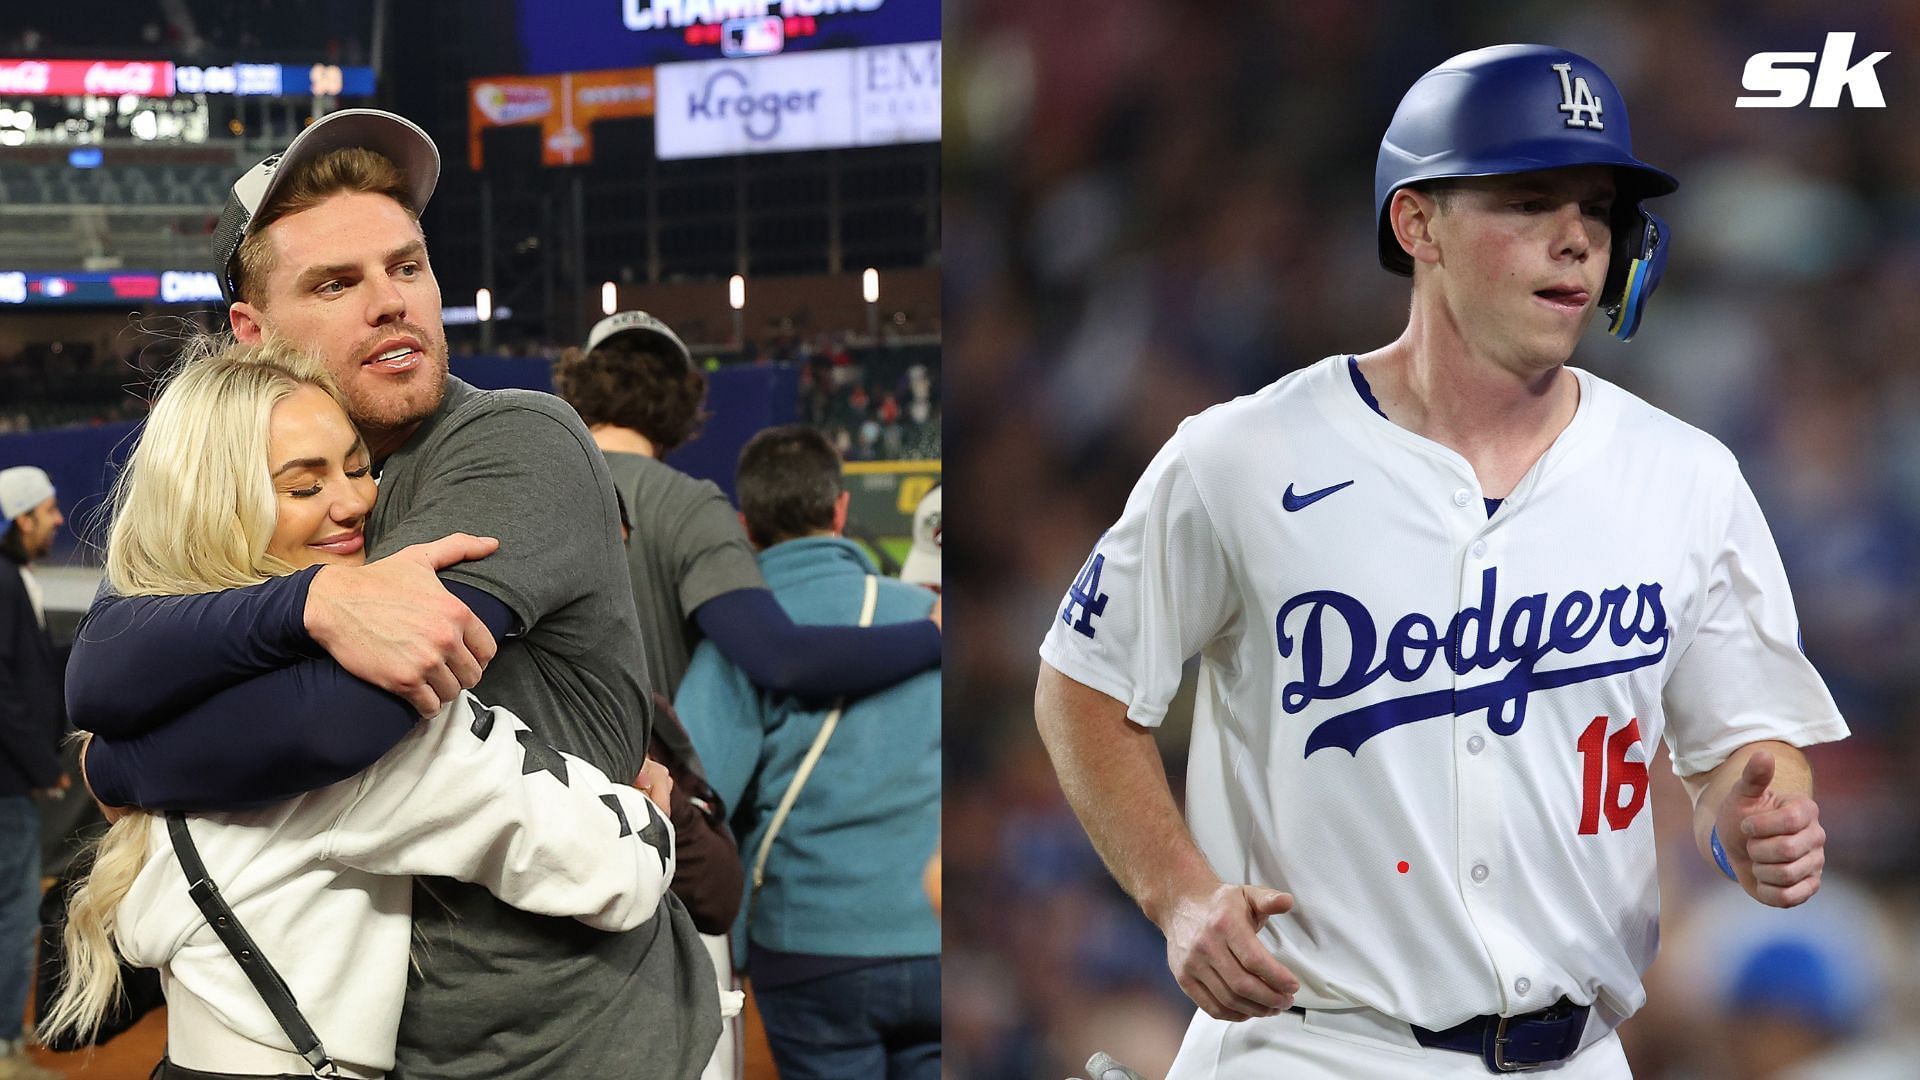 Freddie Freeman and his wife Chelsea attended a comedy show hosted by Dodgers catcher Will Smith